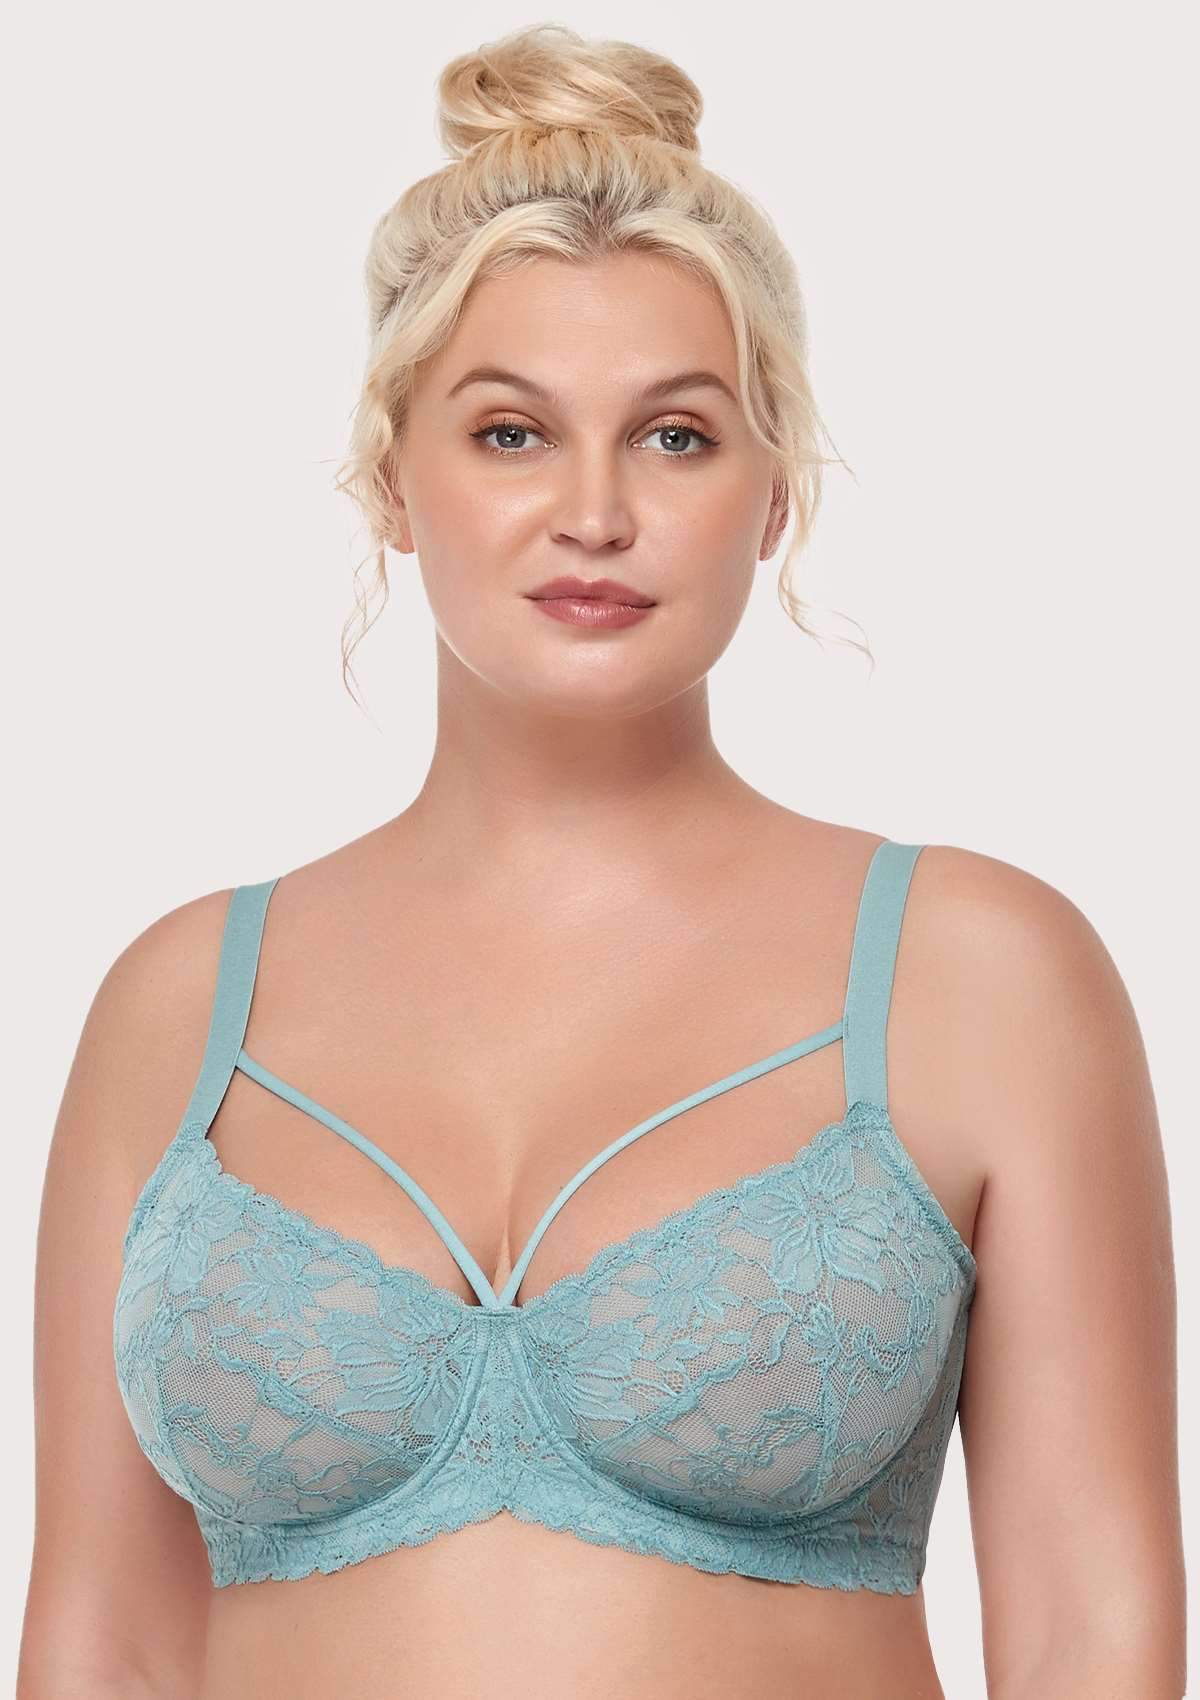 HSIA Pretty In Petals Unlined Lace Bra: Comfortable And Supportive Bra - Pewter Blue / 36 / DDD/F